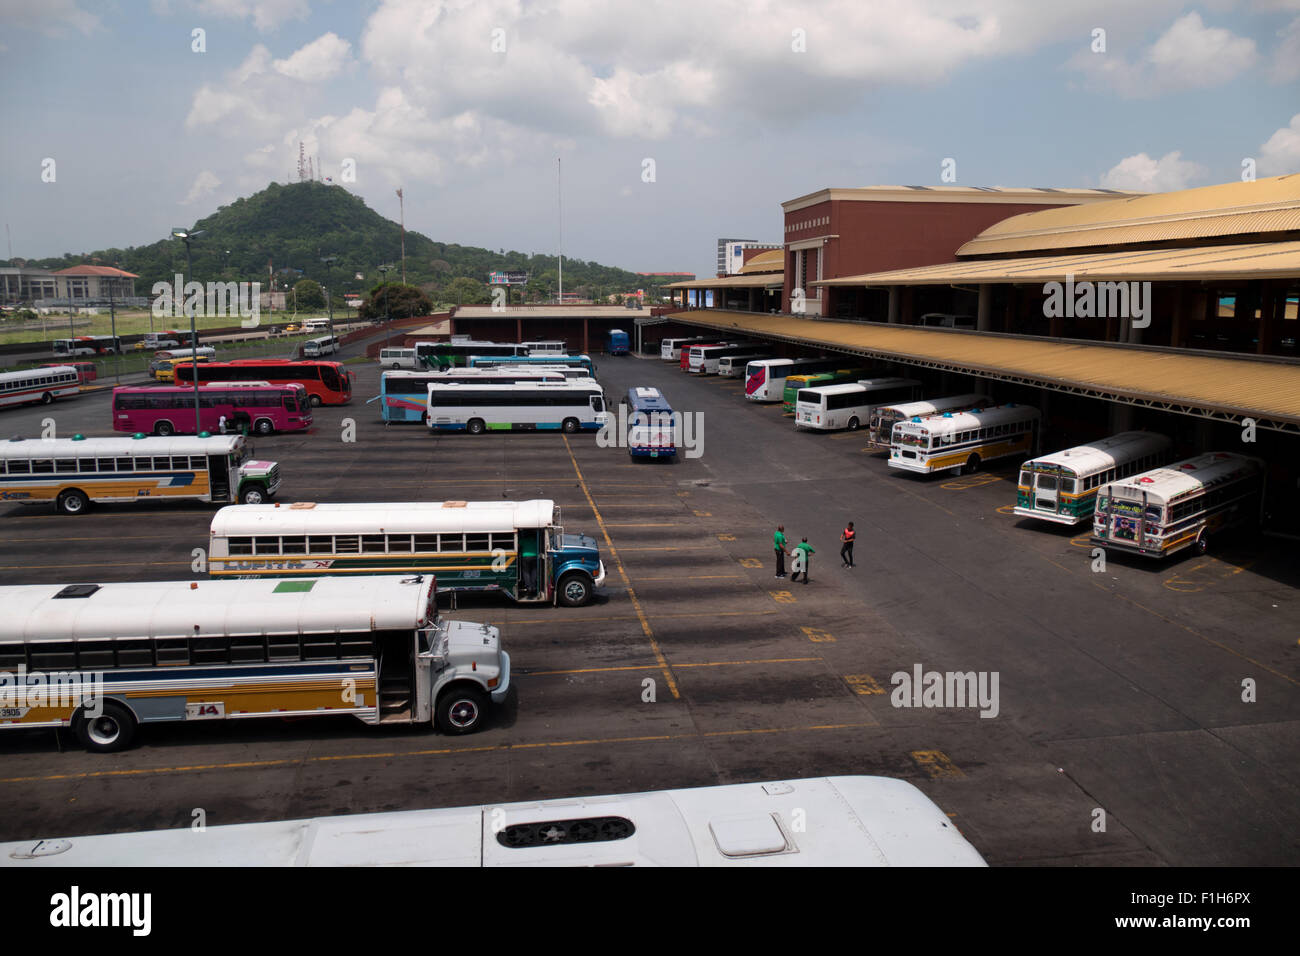 Bus terminal for tourists and travelers in Panama City, Central America. Travel and transportation with station for coaches Stock Photo